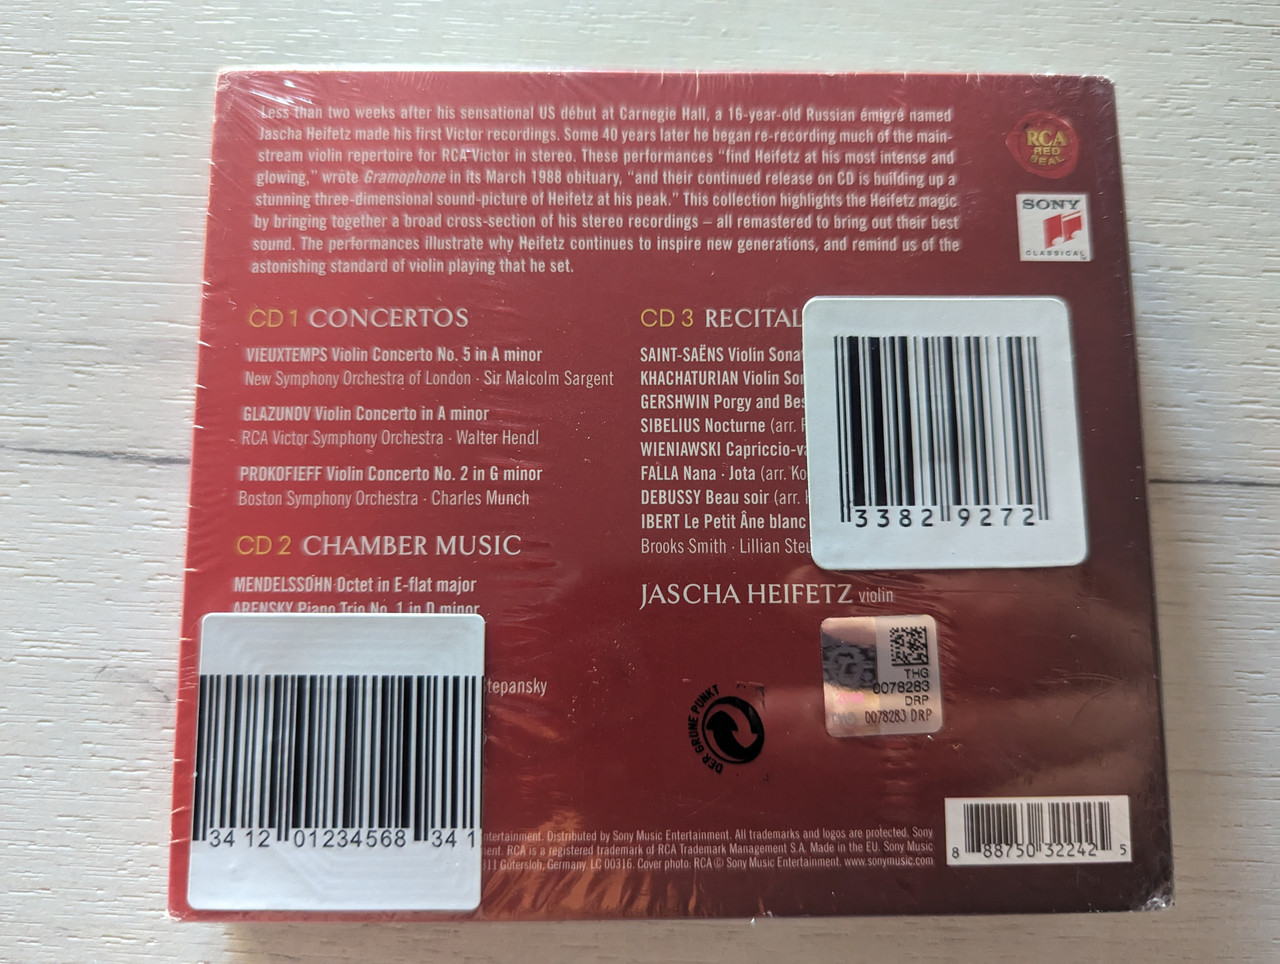 https://cdn10.bigcommerce.com/s-62bdpkt7pb/products/0/images/314145/The_Magic_of_Jascha_Heifetz_-_Remastered_3_CDs_of_Selected_Highlights_from_Jascha_Heifetzs_Complete_Remastered_Stereo_Recordings_RCA_Red_Seal_3x_Audio_CD_2016_88875032242_2__22949.1701324215.1280.1280.jpg?c=2